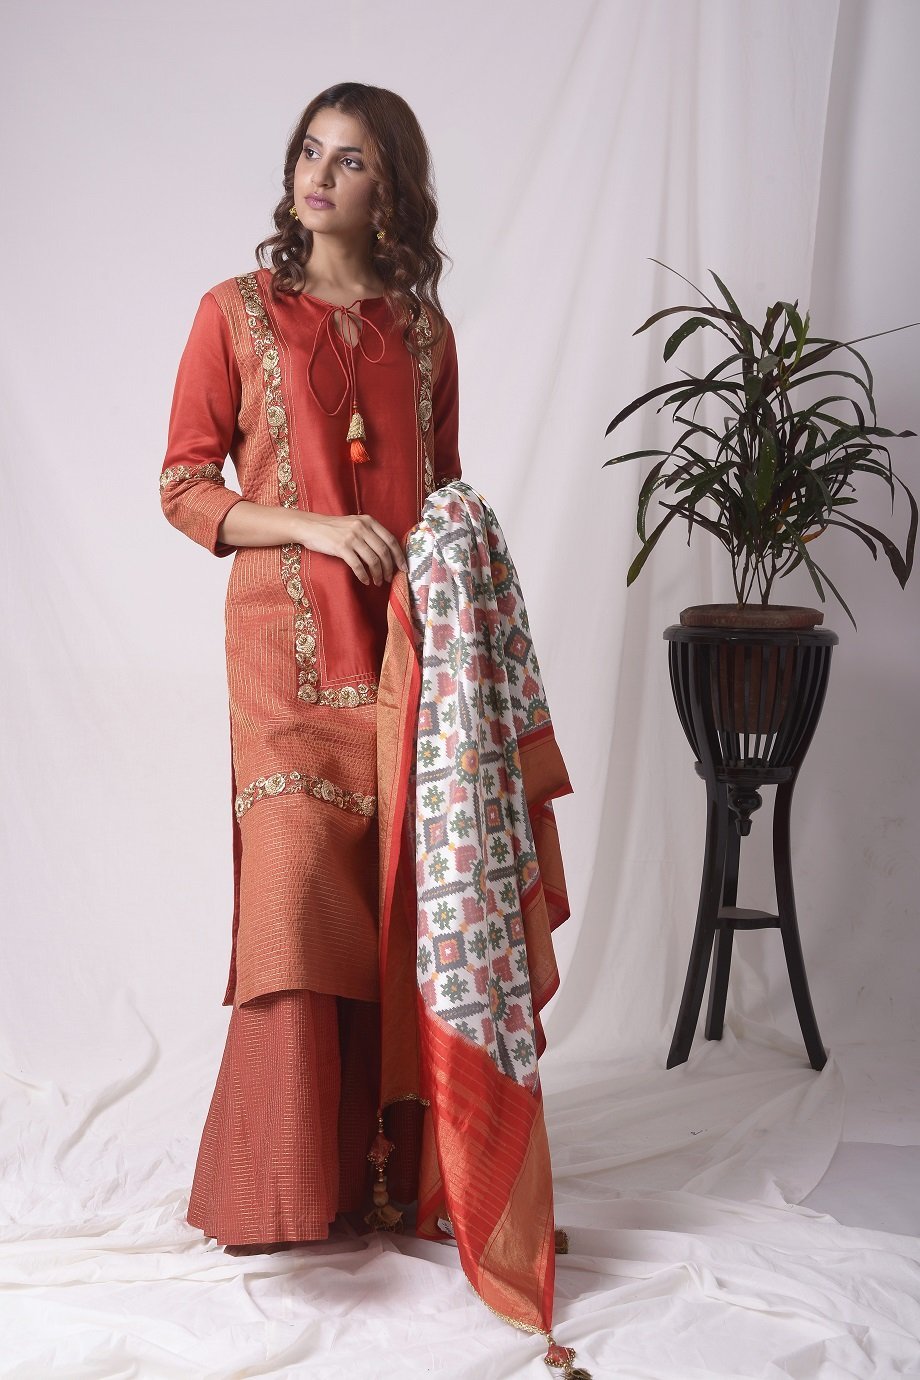 Red Churidar Suits - Shop Red Indian Churidar Suits Online